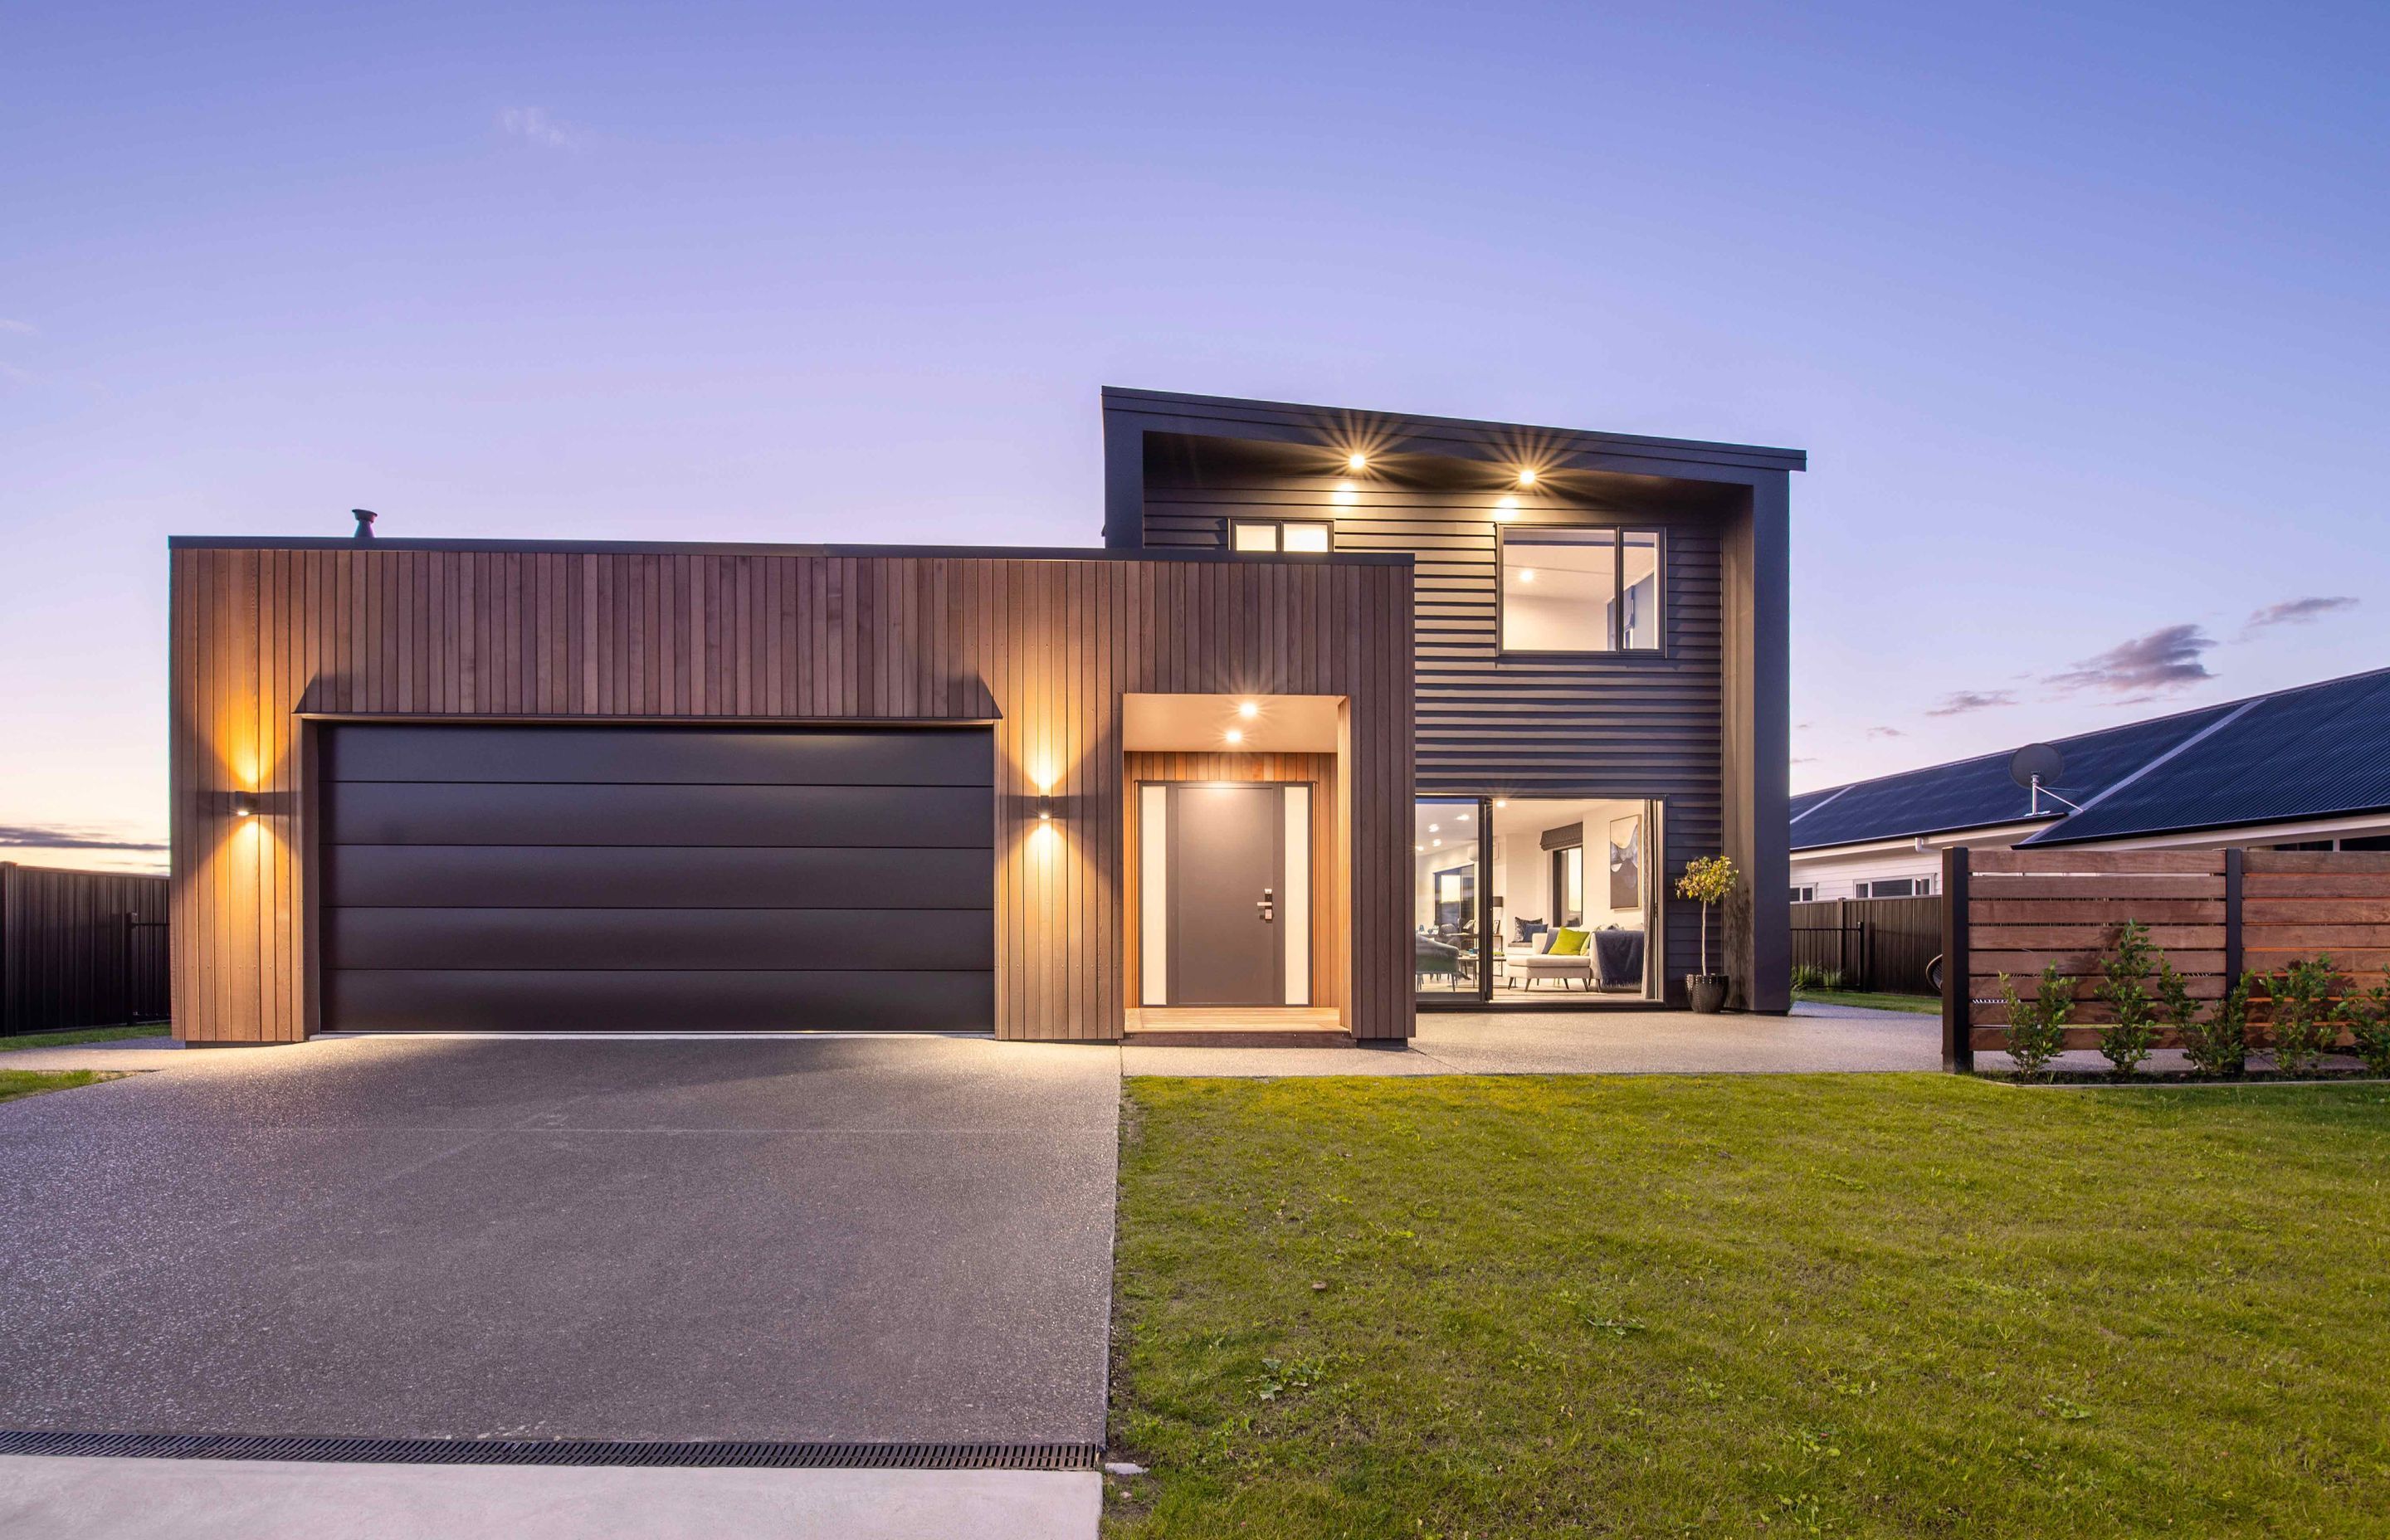 Situated less than 10 minutes from Taupo’s CBD, this new home from David Reid Homes is part of the Nga Roto Estate.